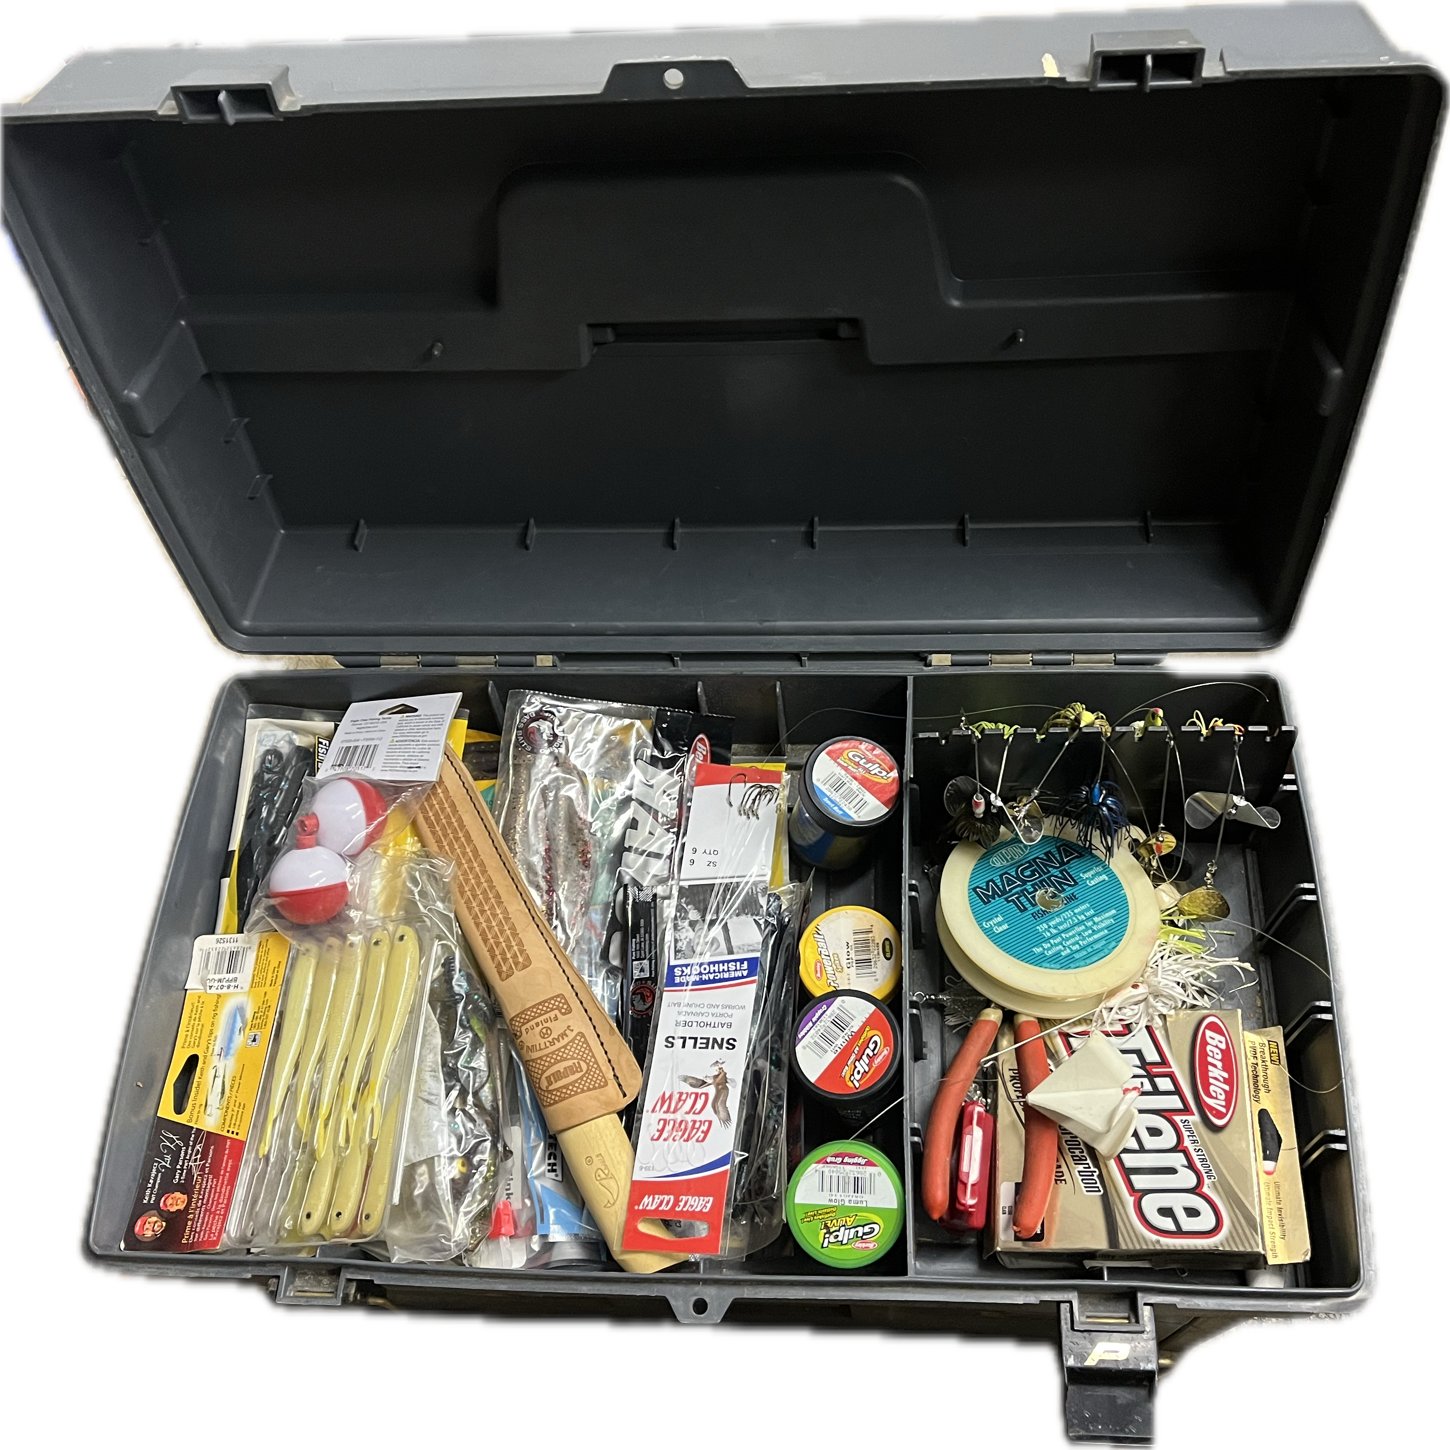 USFWS Fisheries on X: What's in your tackle box? 🎣 Is it all organized or  an, open the lid and toss it in, type box? Share a photo, if you dare. 😁